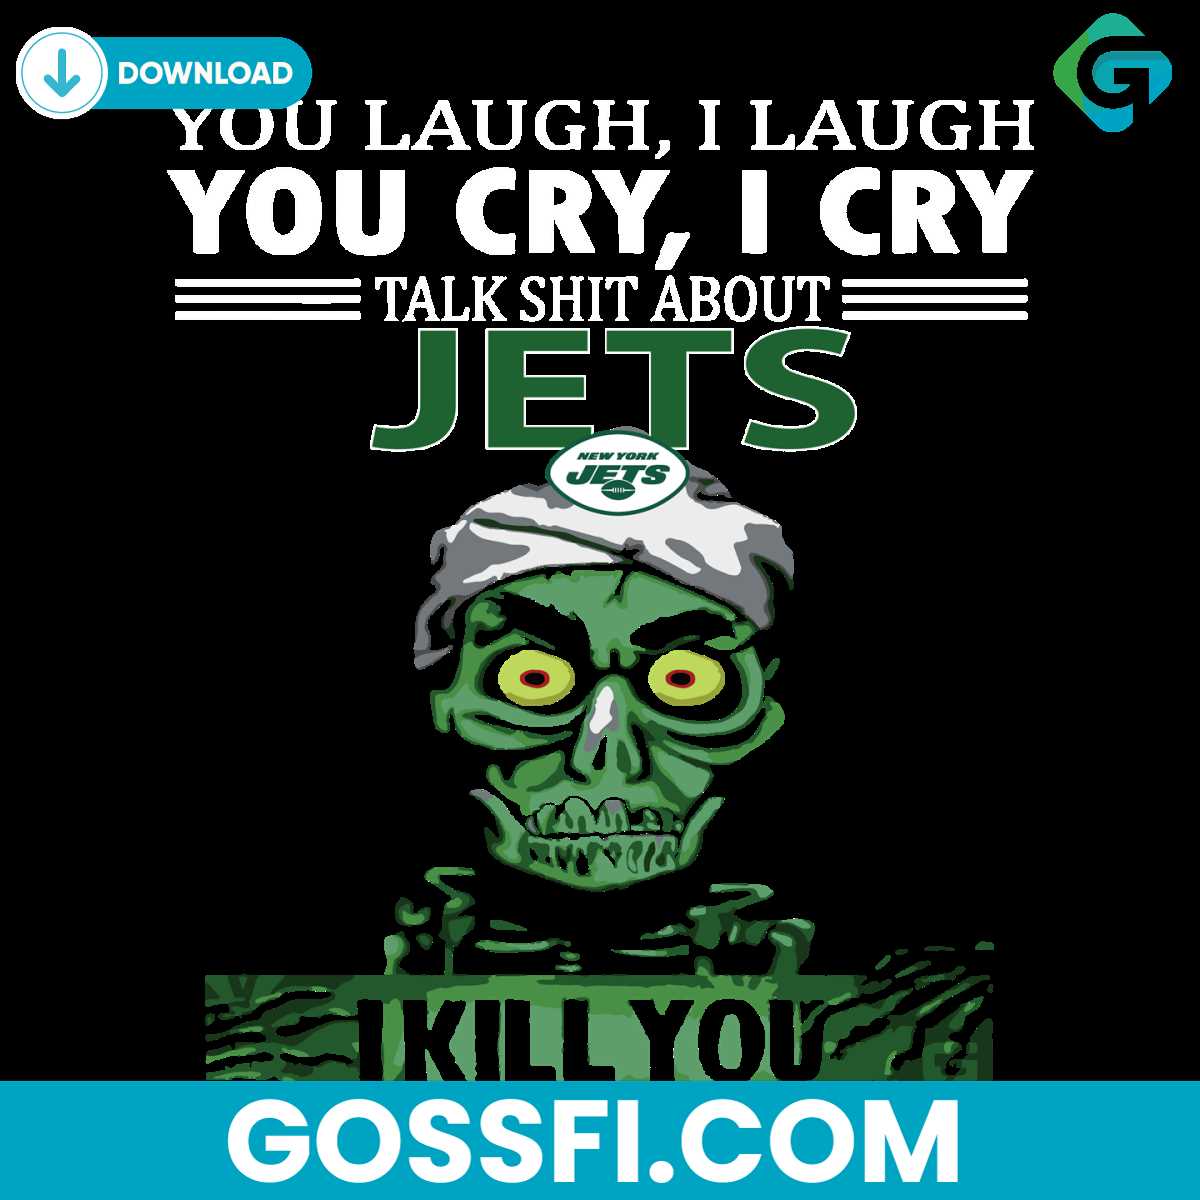 talk-shit-about-new-york-jets-i-kill-you-achmed-the-dead-svg